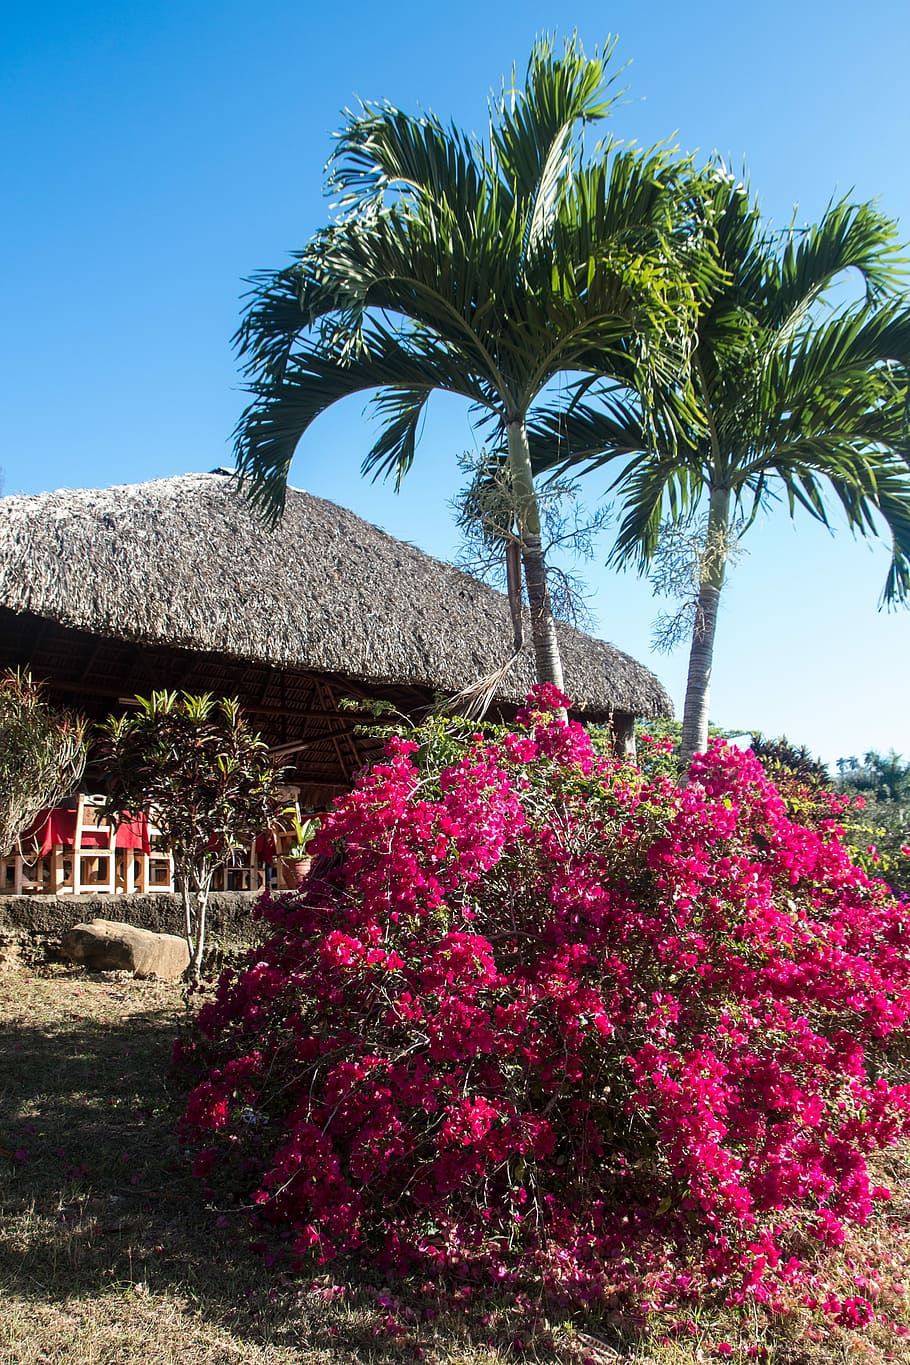 two, palm tress, hut, Cuba, Palm Trees, Bush, Thatched Roof, bougainvillea, tropical Climate, summer